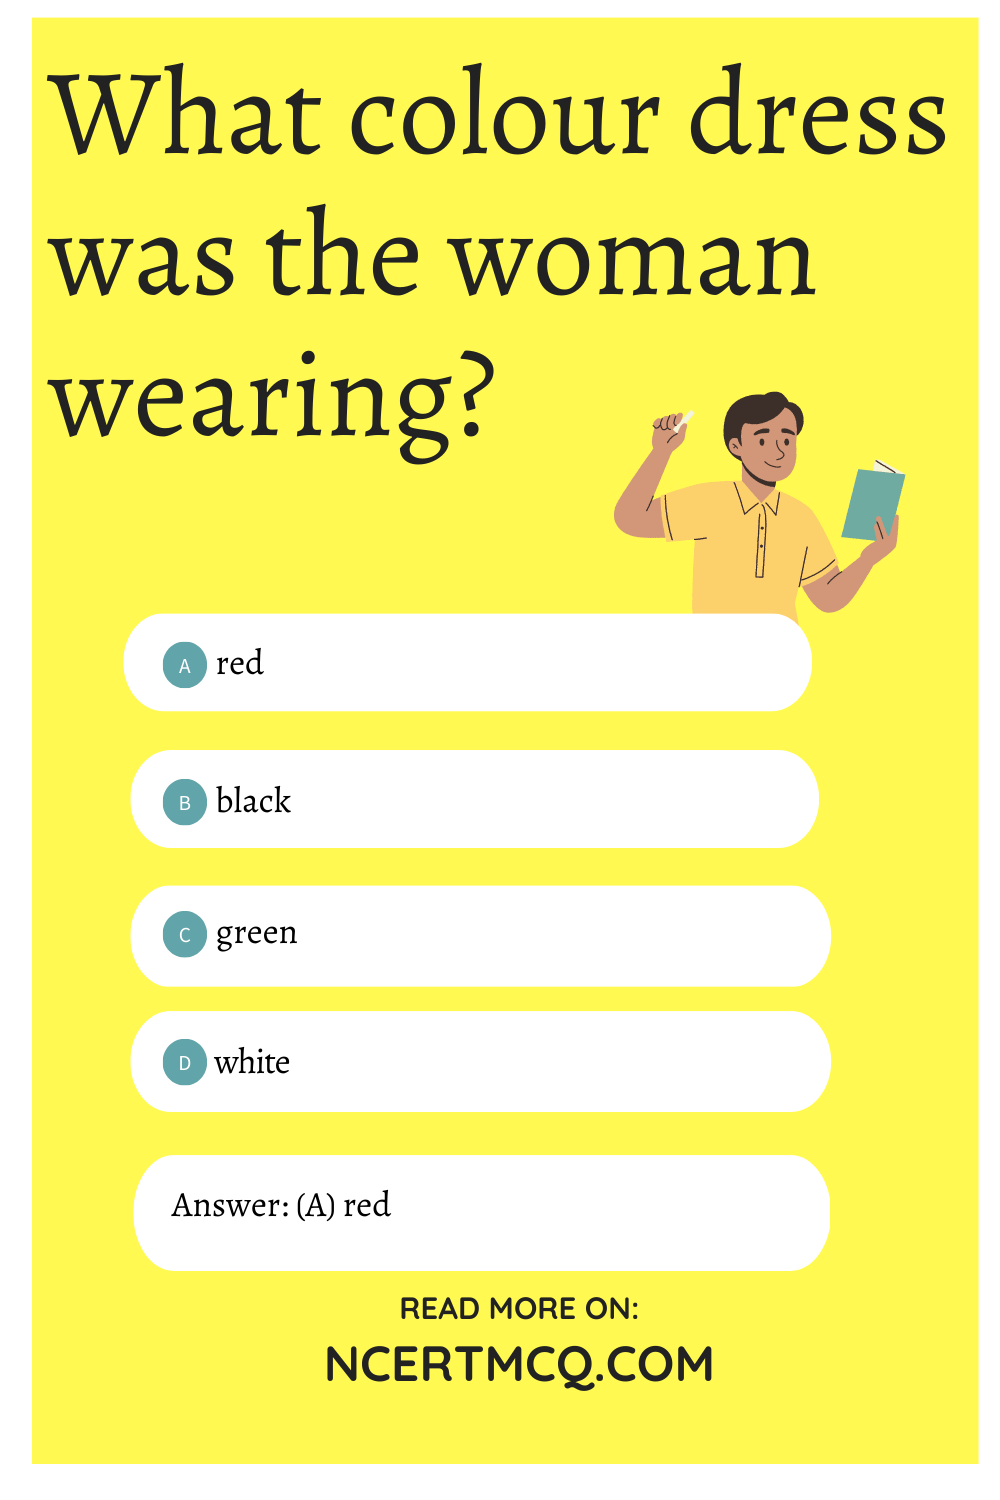 What colour dress was the woman wearing?